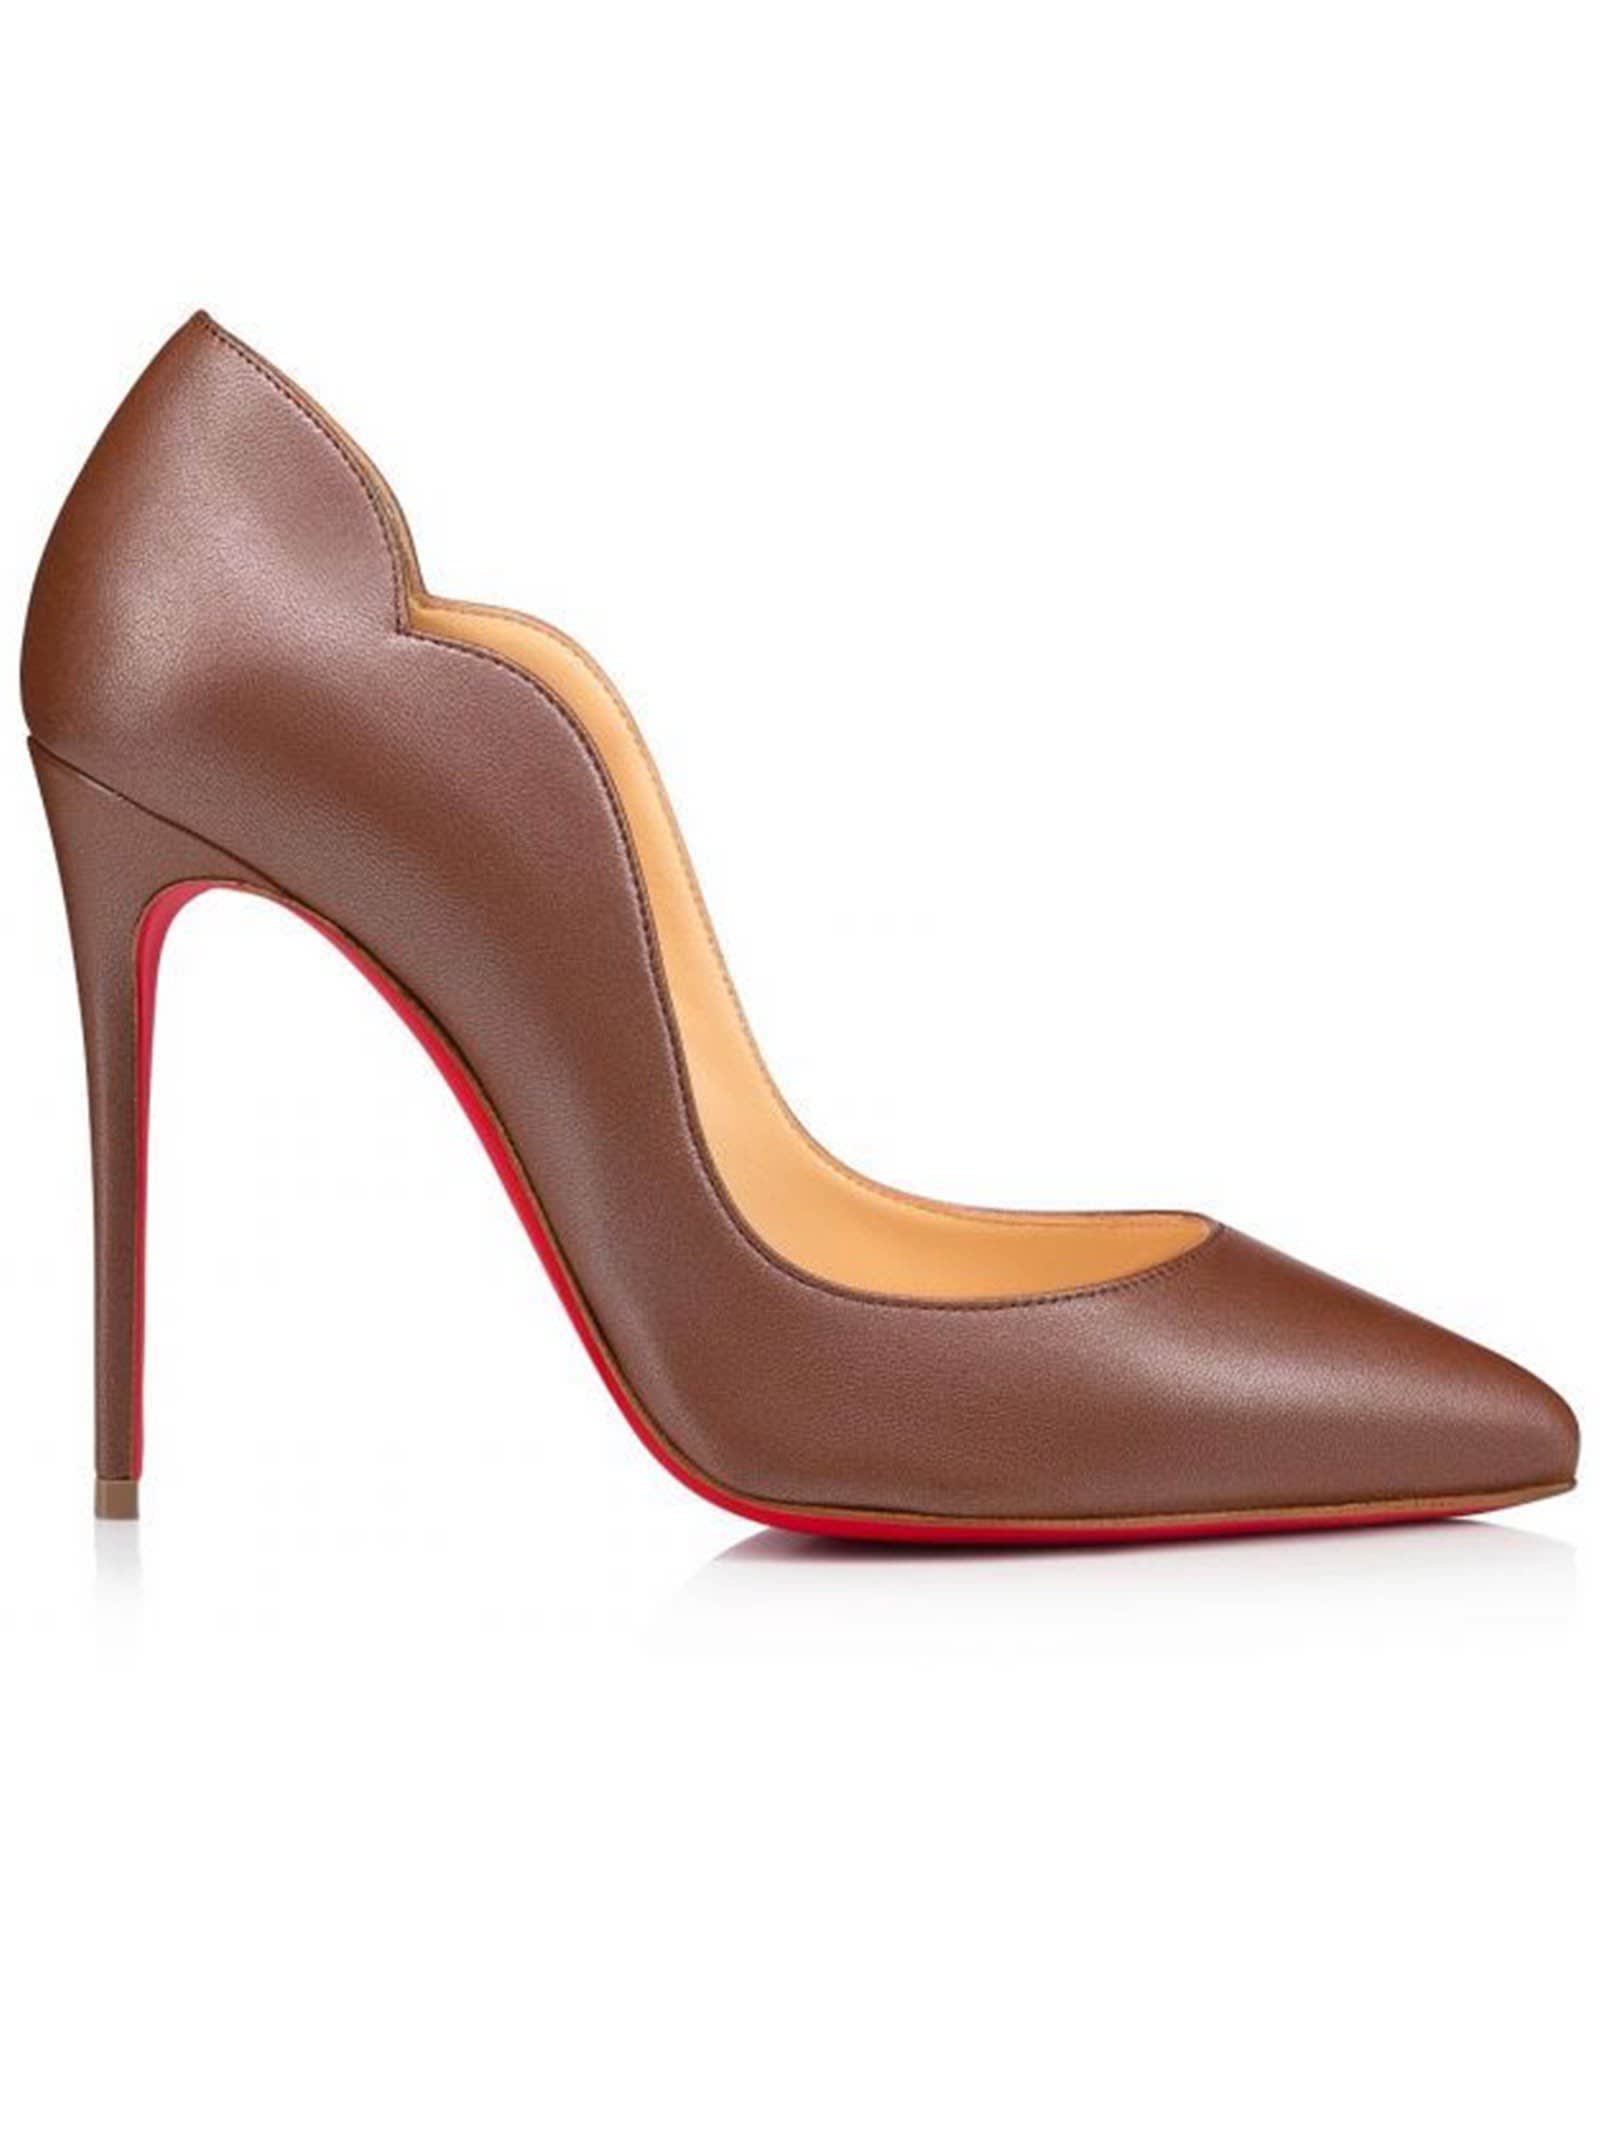 Buy Christian Louboutin Brown Leather Hot Chick Pumps online, shop Christian Louboutin shoes with free shipping